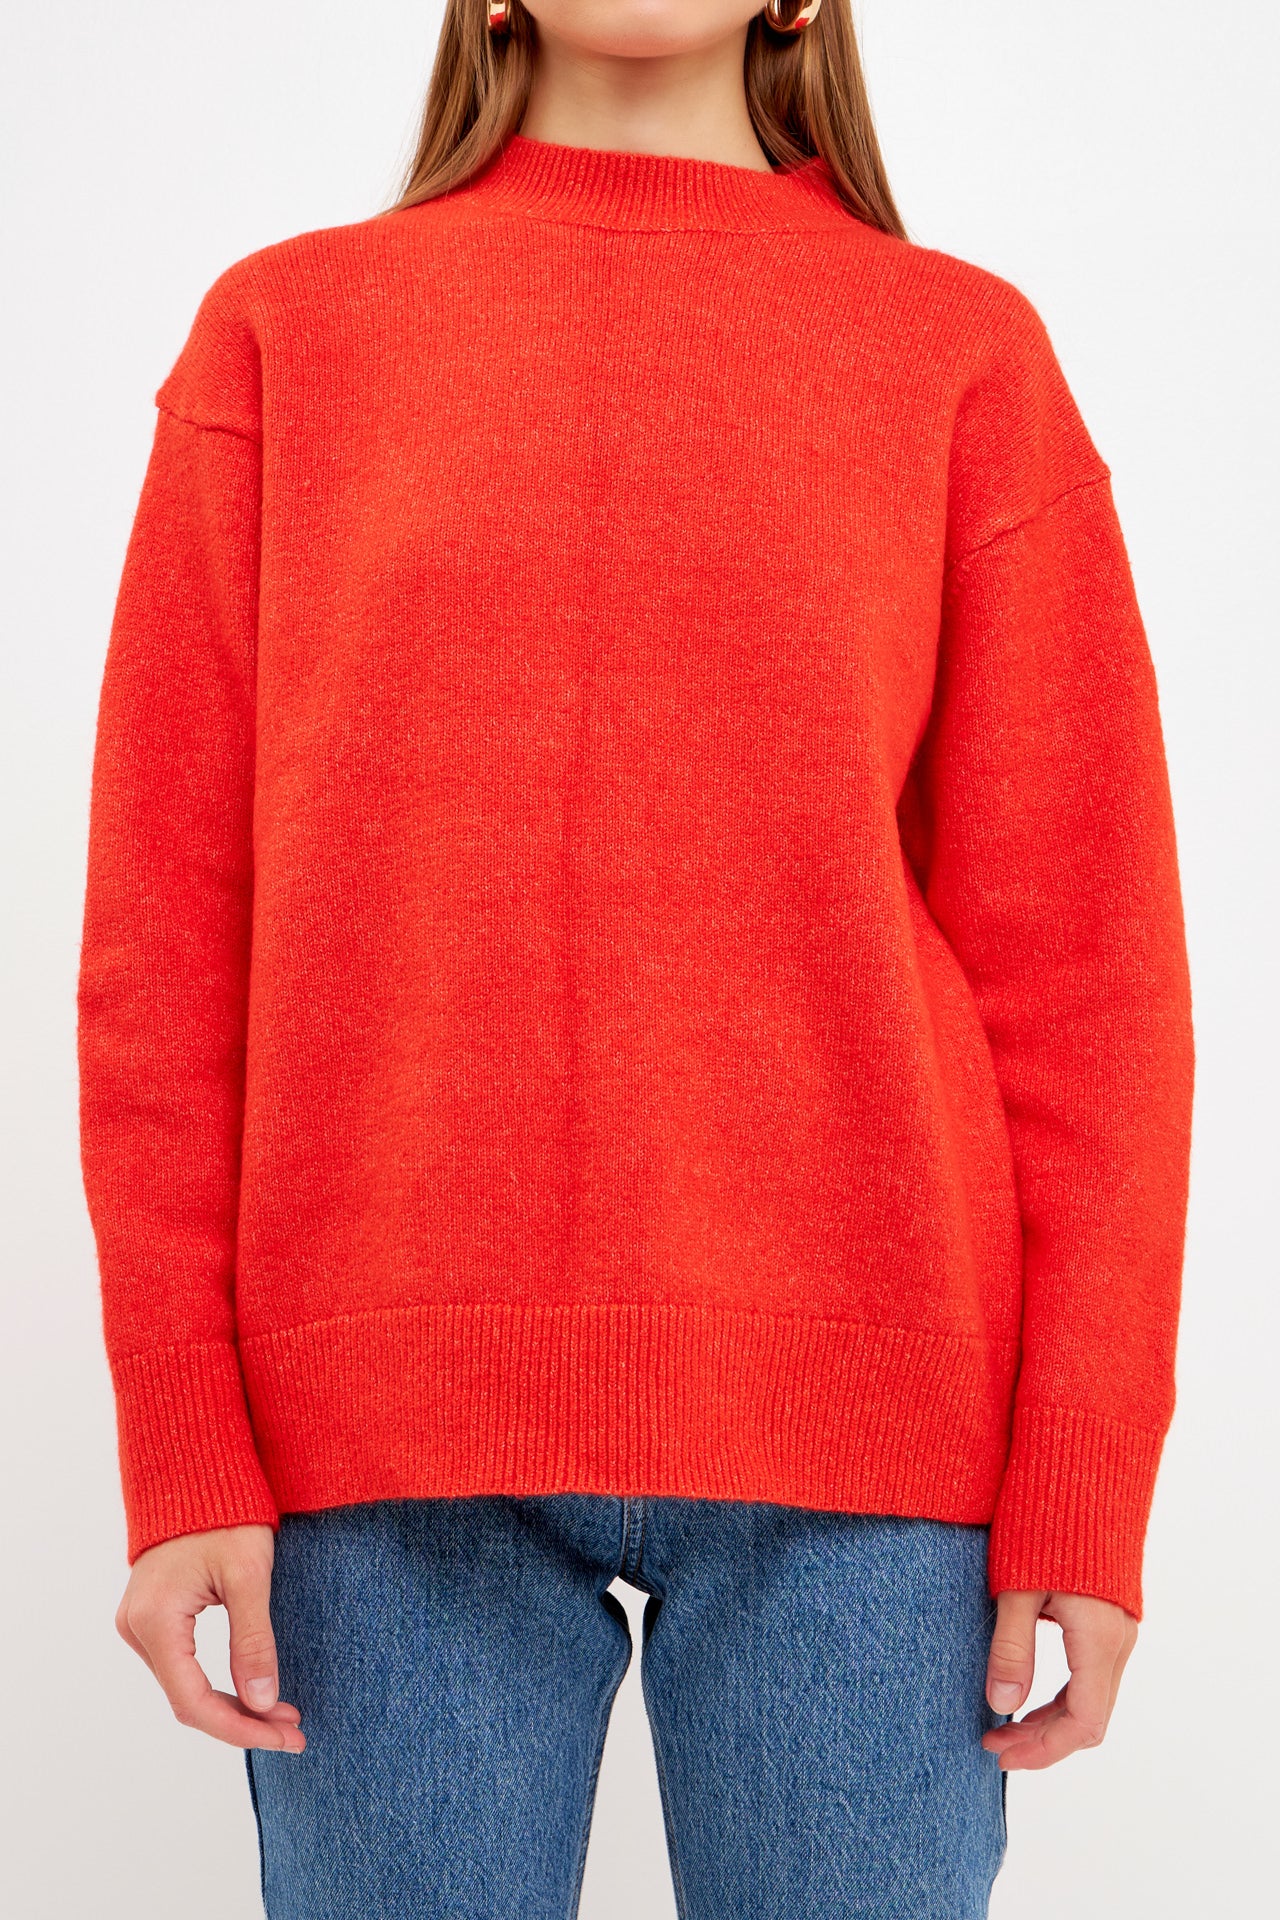 ENDLESS ROSE - Oversized Crewneck Sweater - SWEATERS & KNITS available at Objectrare